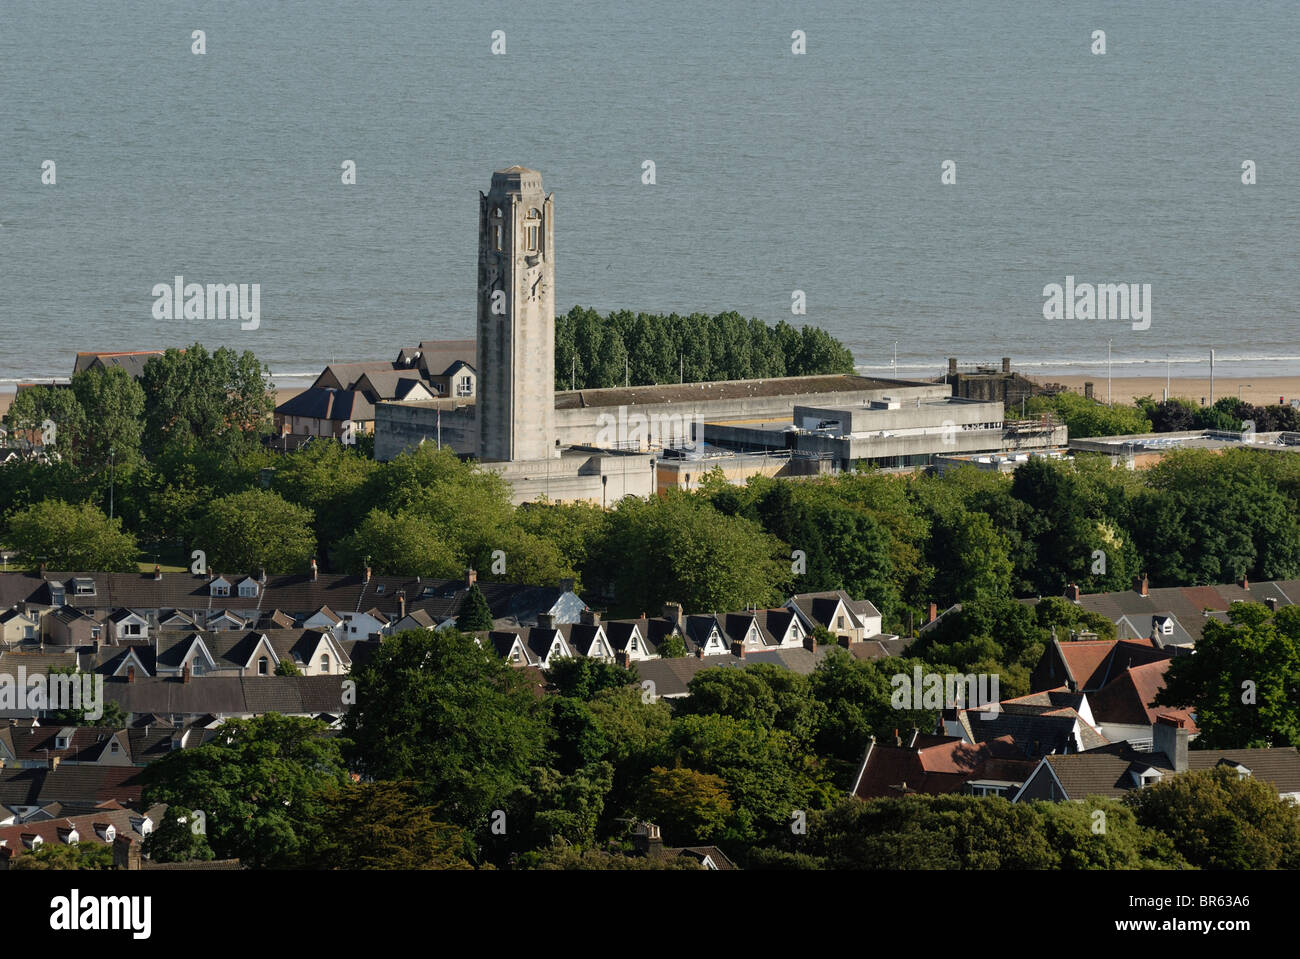 The Guildhall, Swansea, council offices and concert venue (The Brangwyn Hall), Wales, UK Stock Photo